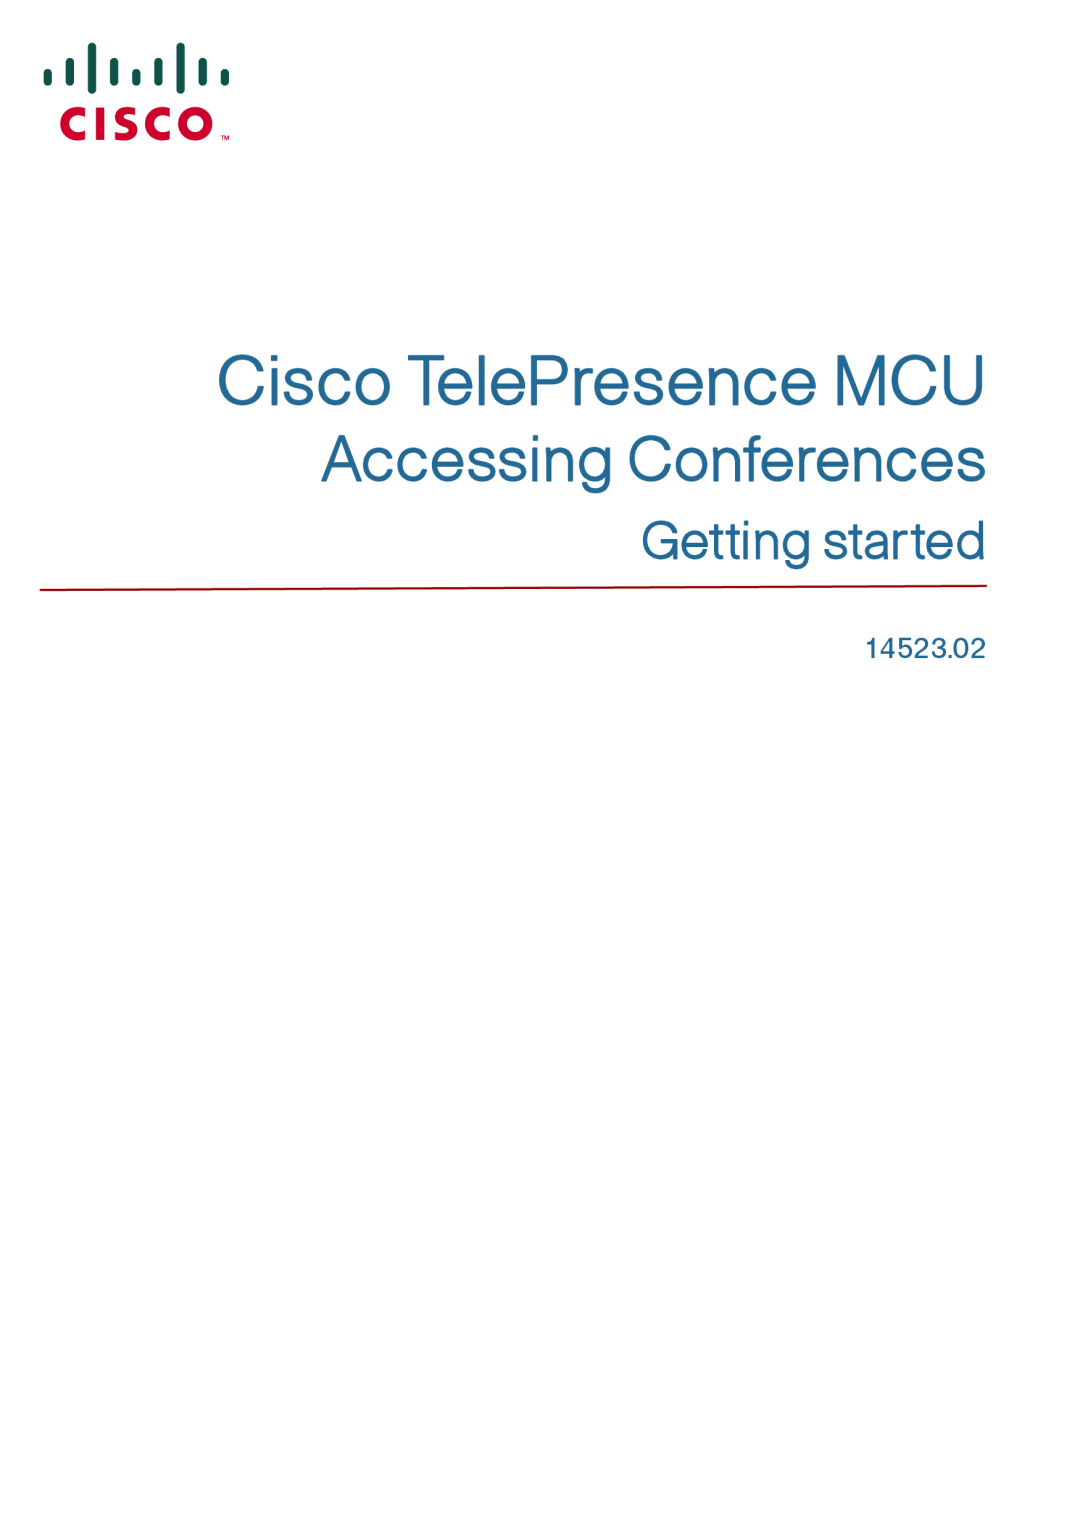 Cisco Systems 14523.02 manual Cisco TelePresence MCU, Accessing Conferences, Getting started 